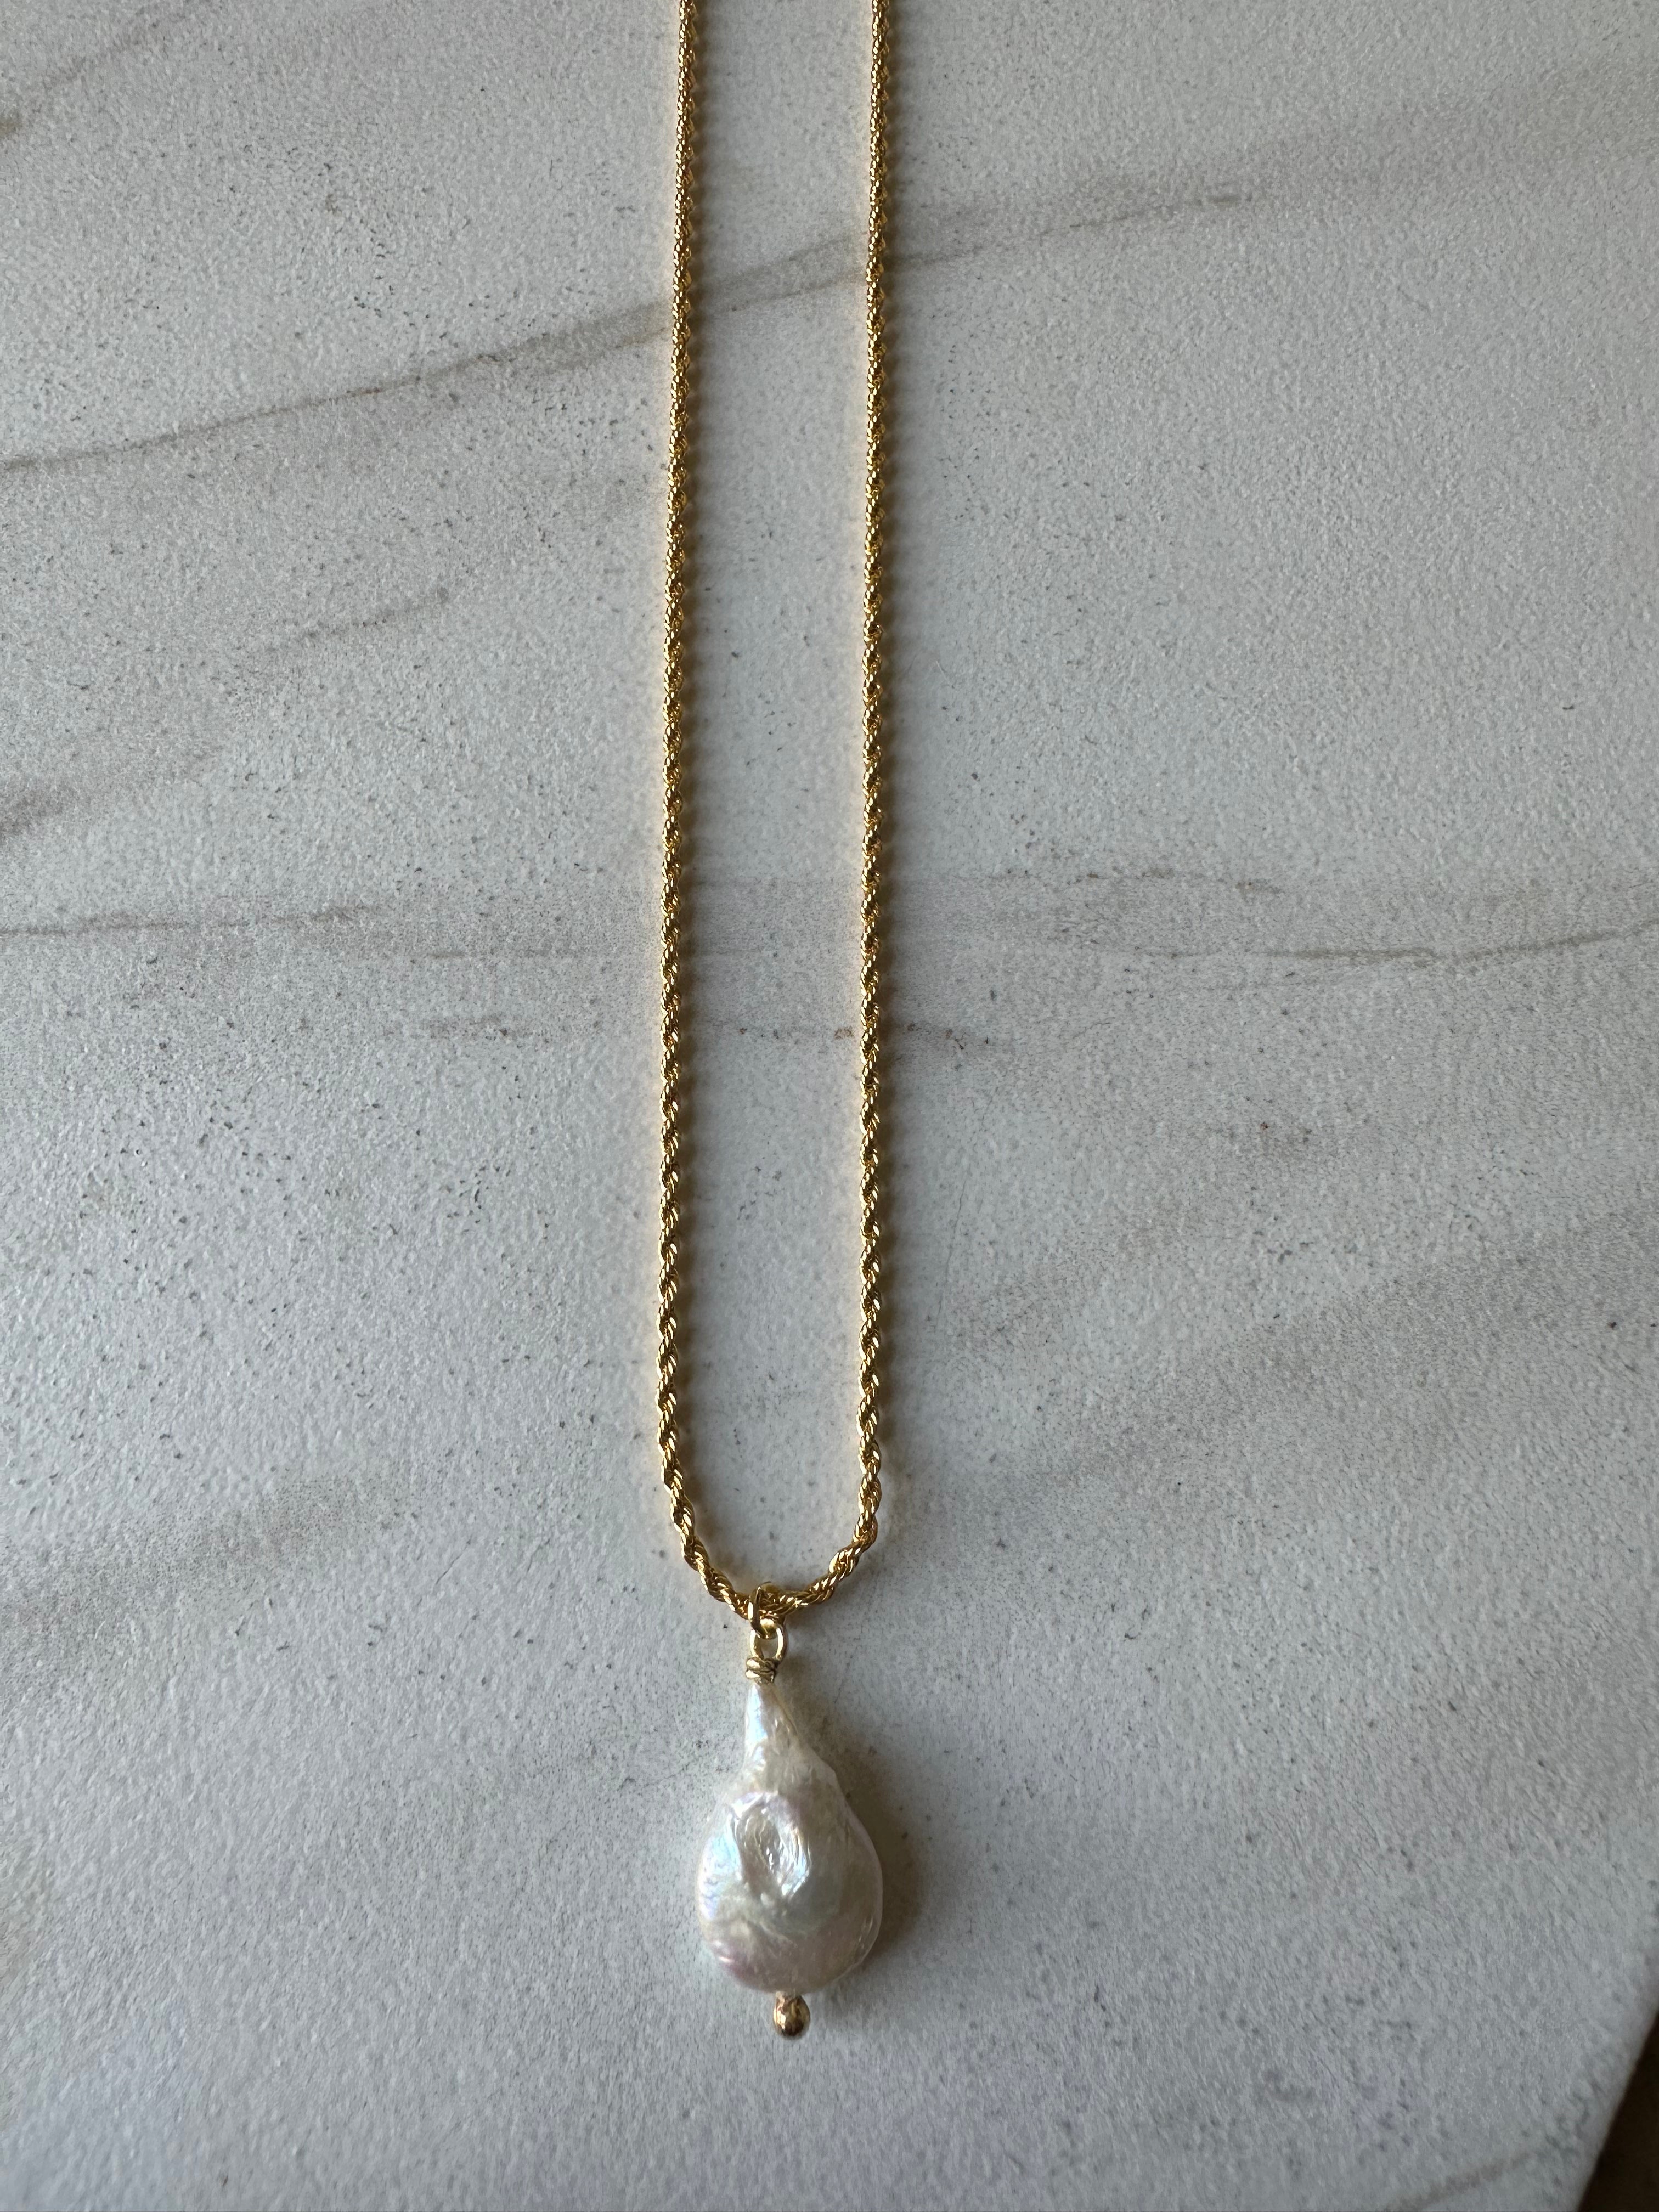 Pearl & Braid Necklace